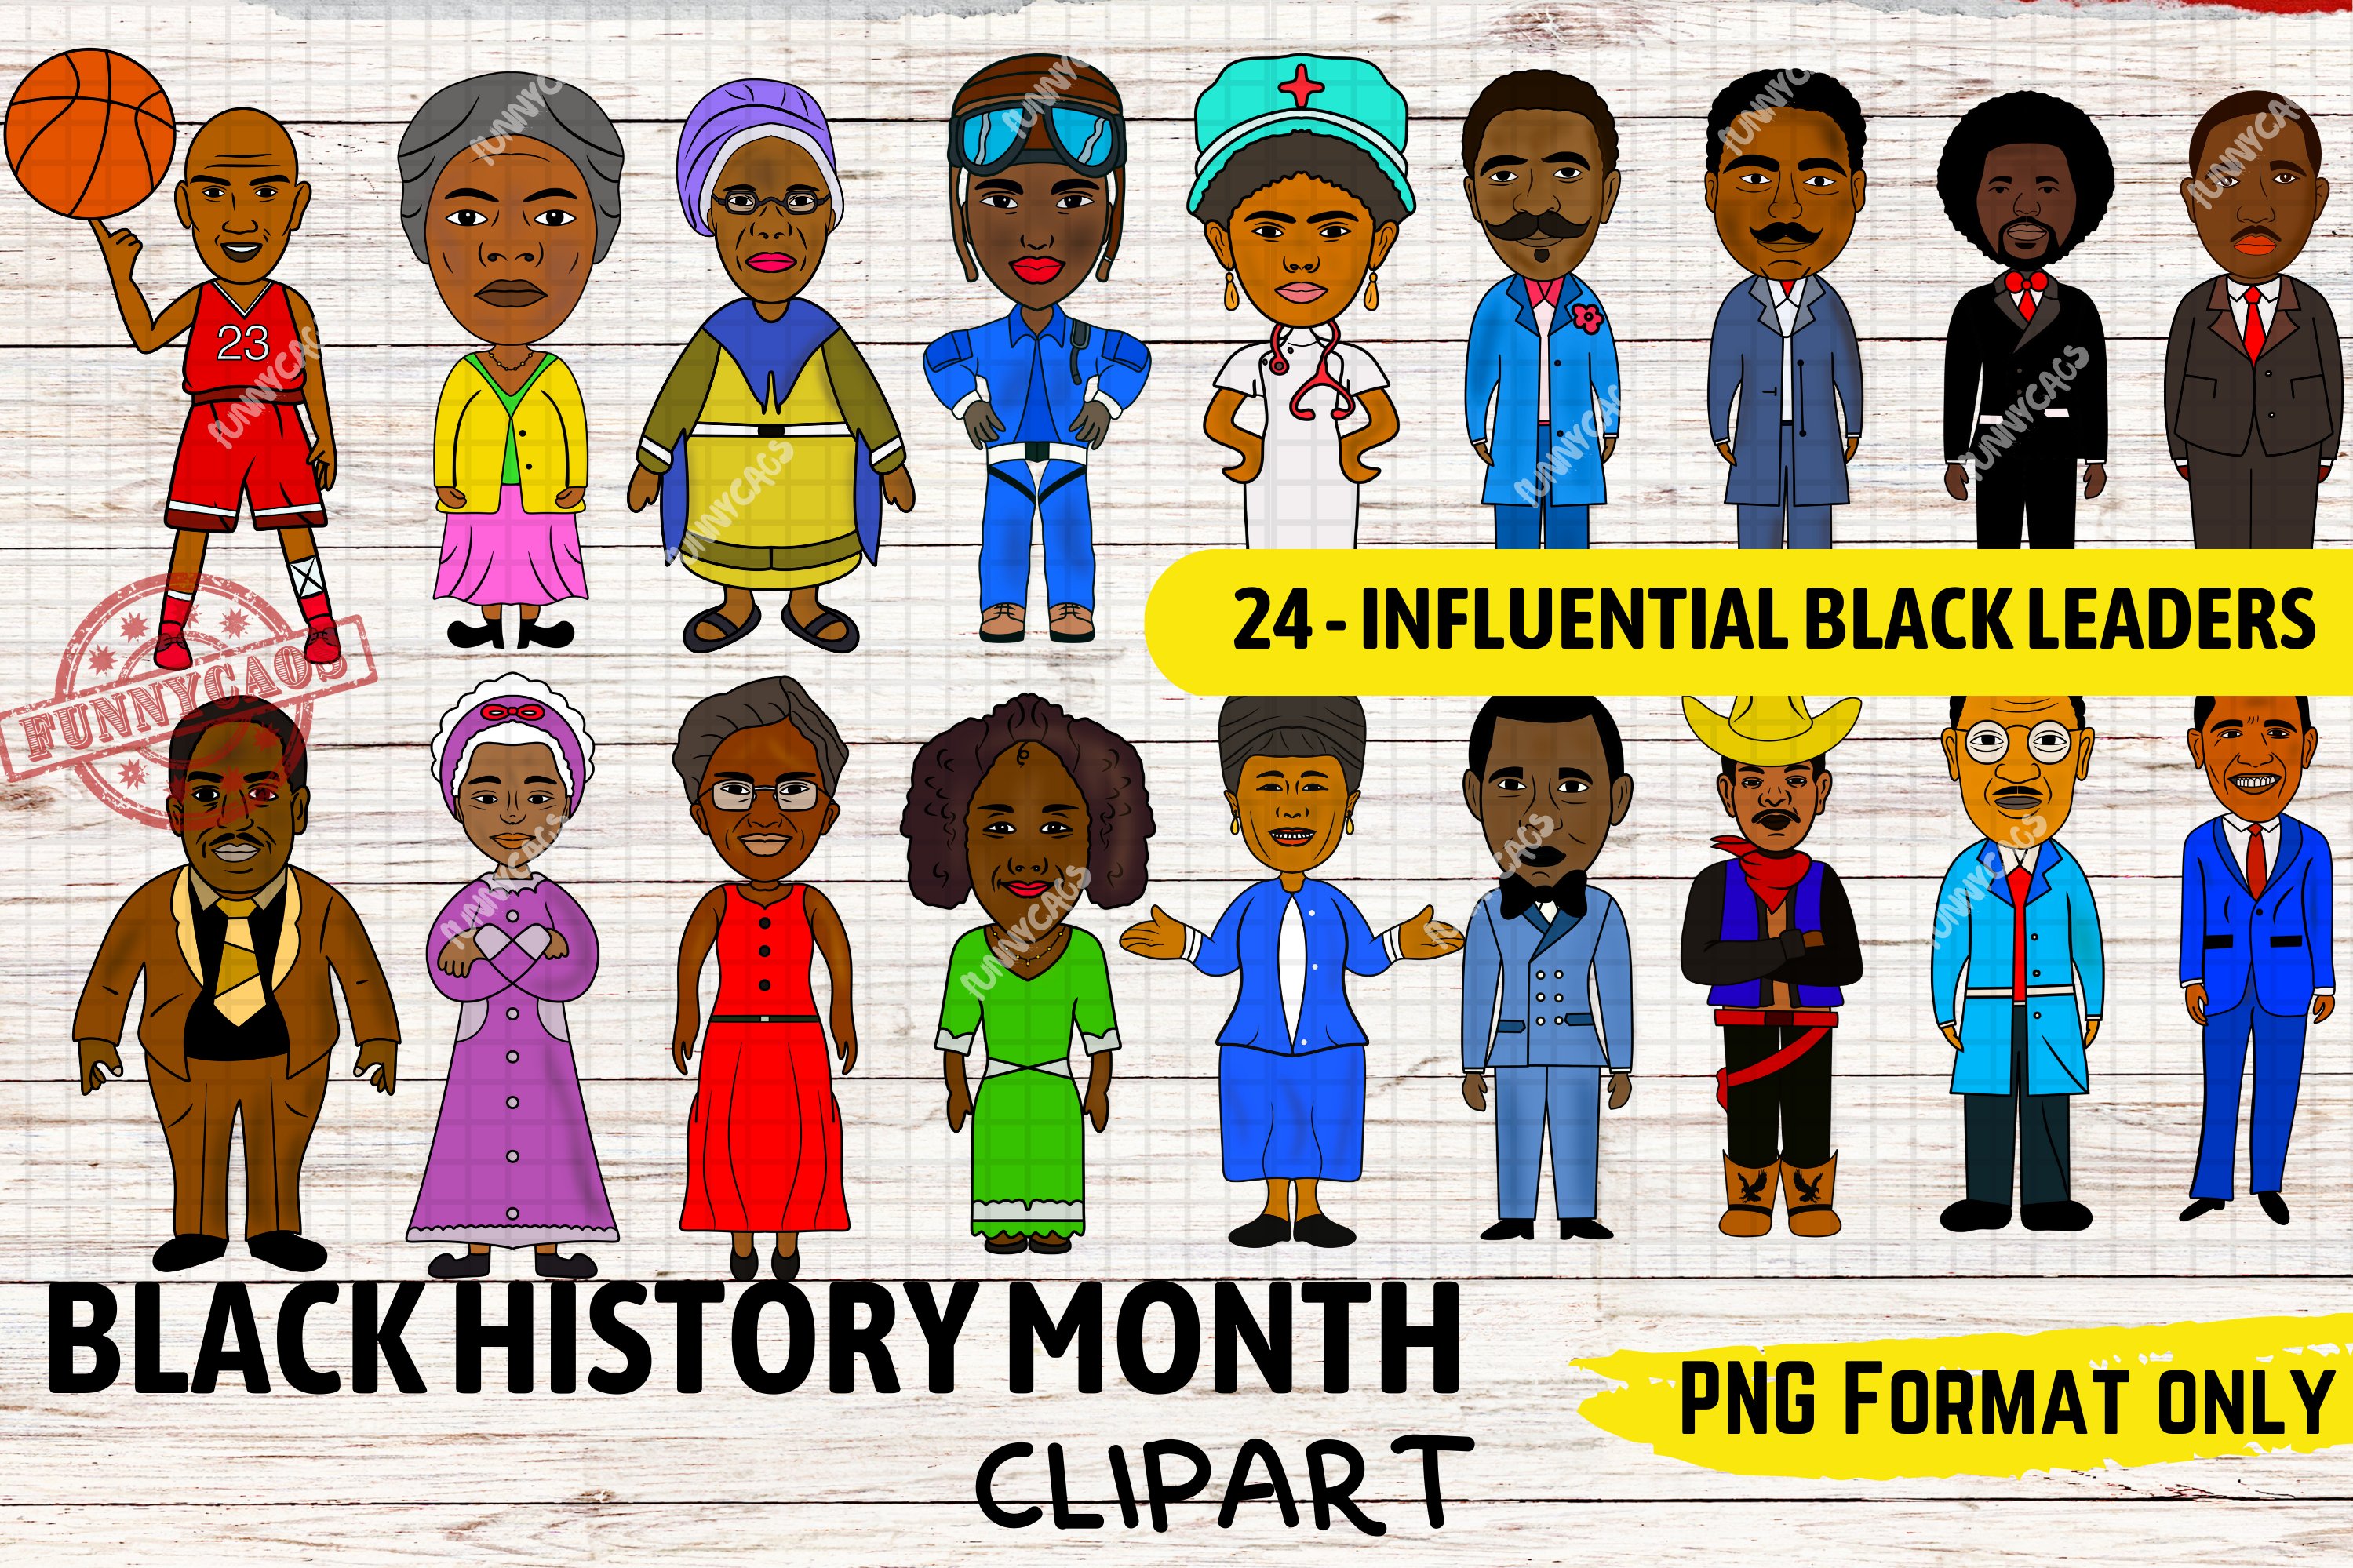 Black history month characters clipart